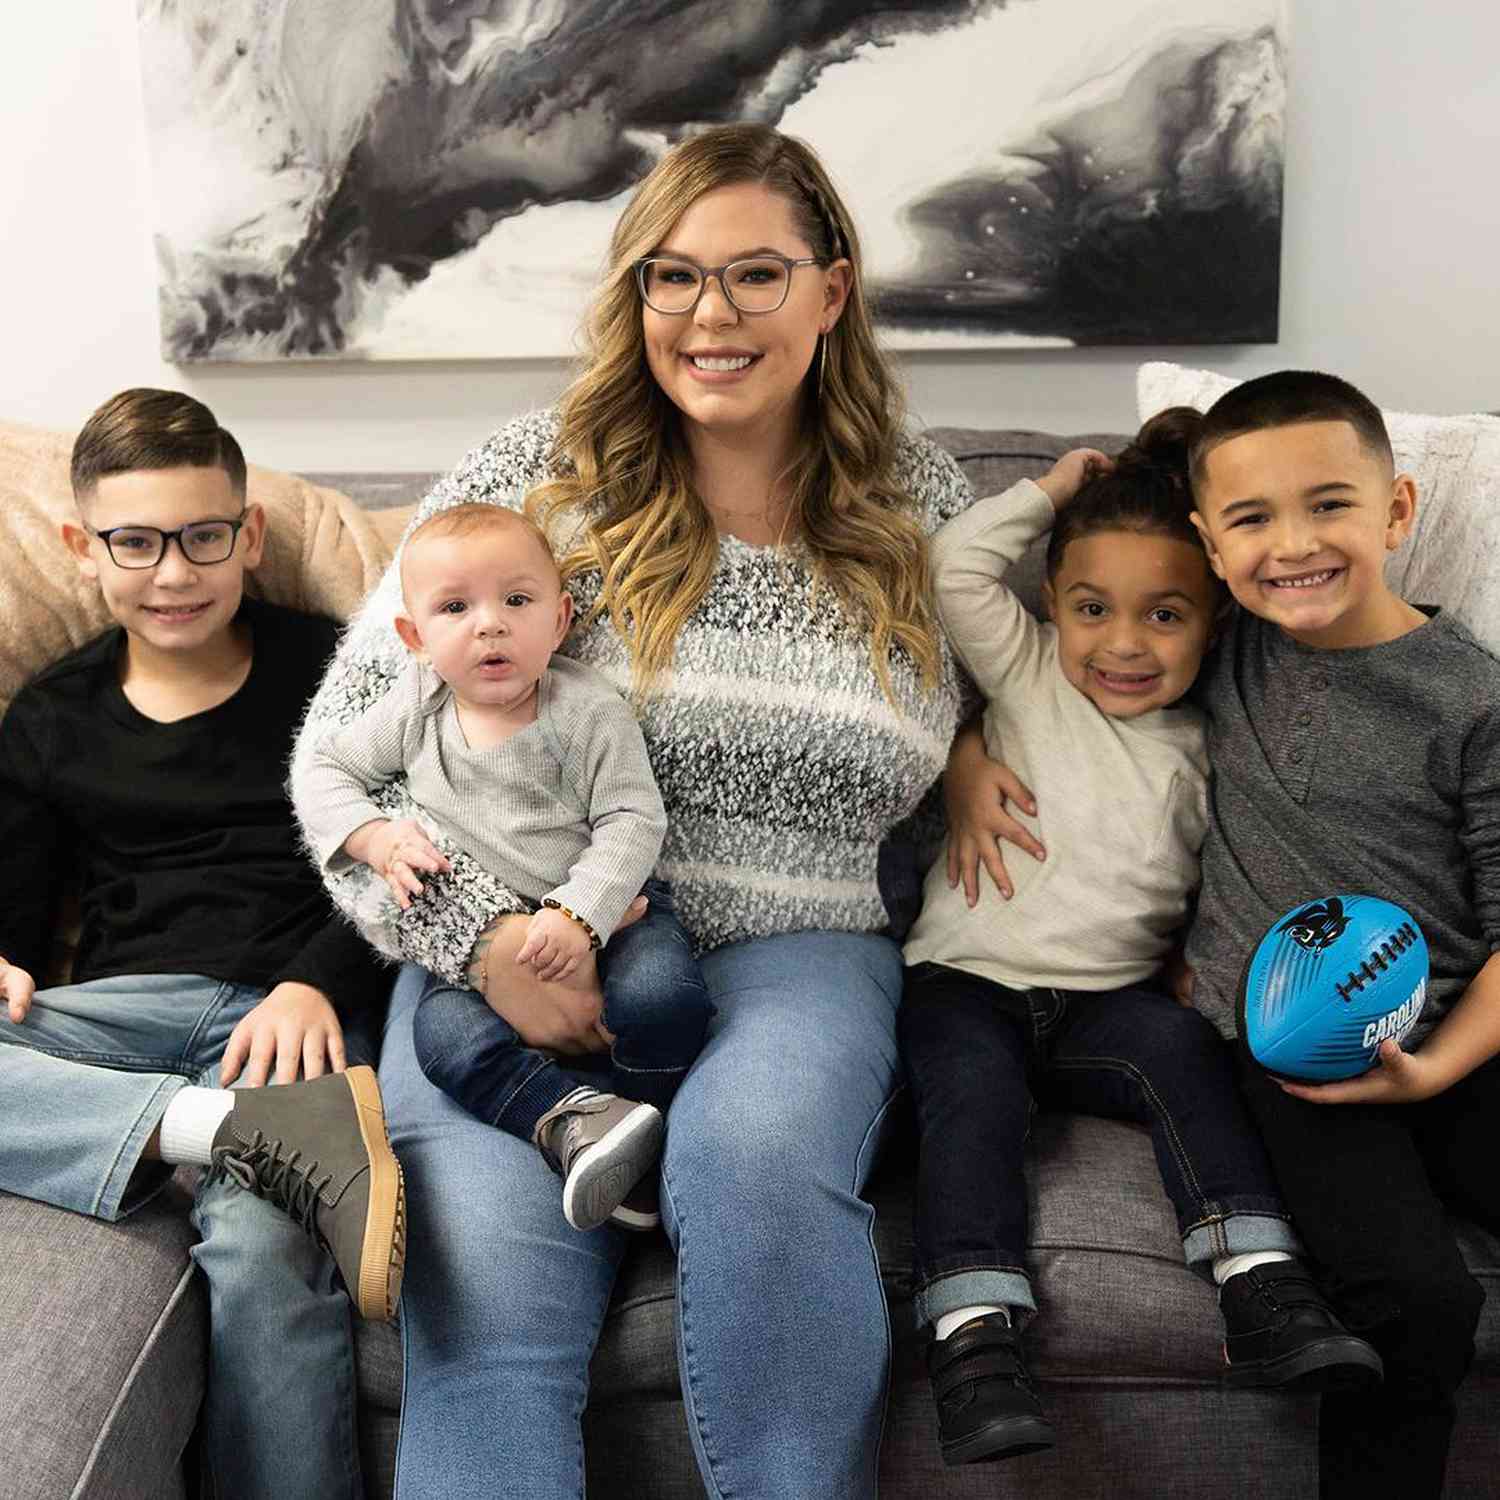 Kailyn Lowry and her children